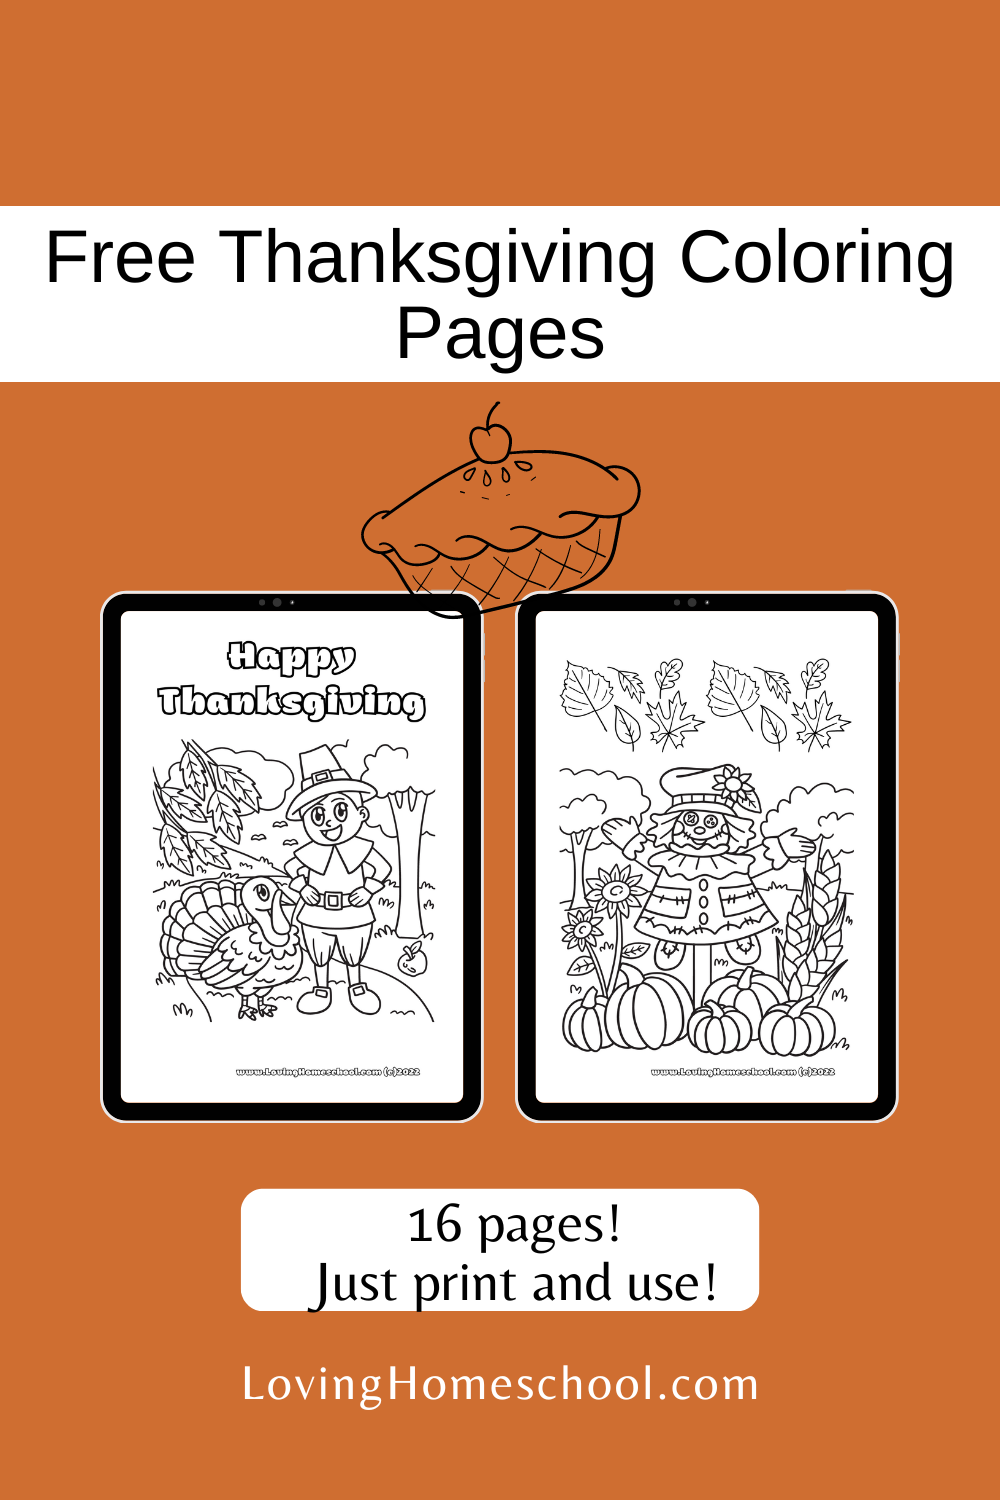 Free Thanksgiving Coloring Pages Pinterest Pin